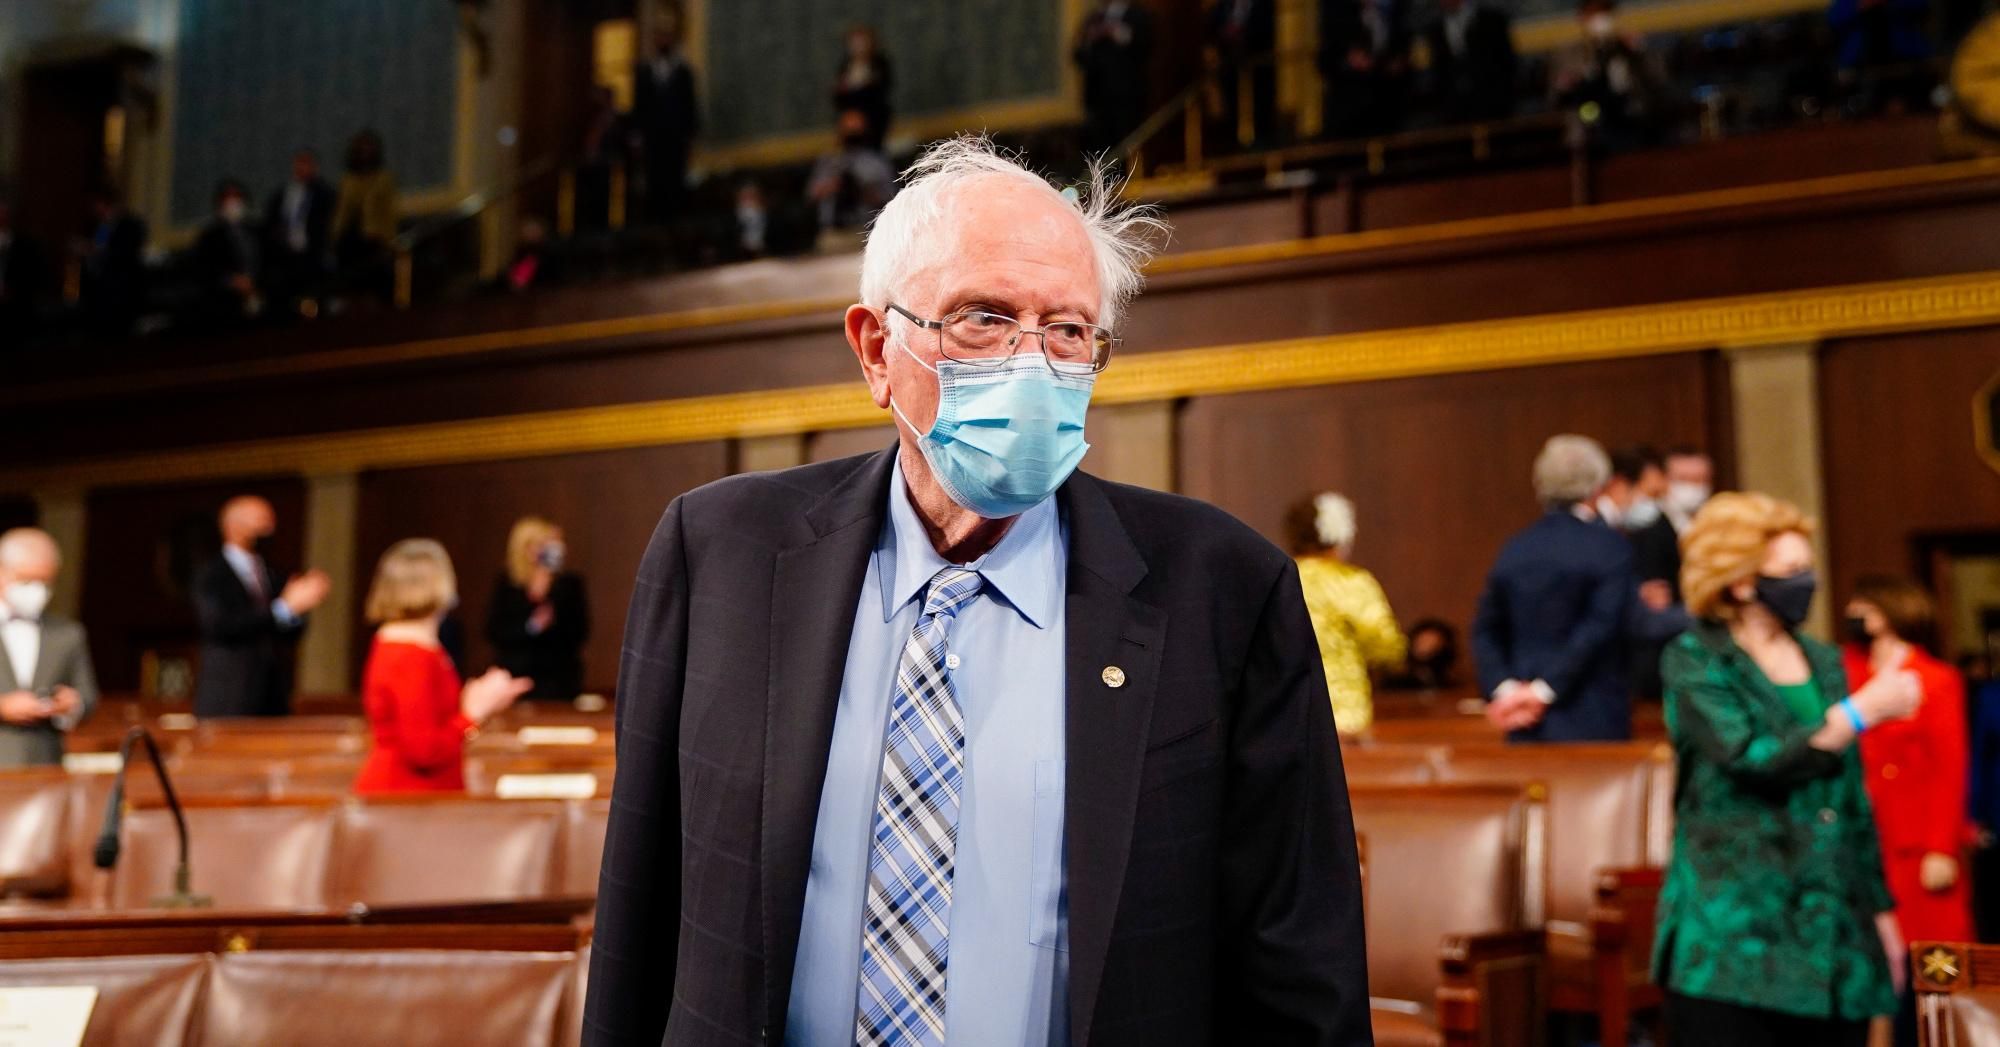 Sen. Bernie Sanders (I-Vt.) arrives before President Joe Biden addresses a joint session of Congress in the House chamber of the U.S. Capitol April 28, 2021 in Washington, D.C.